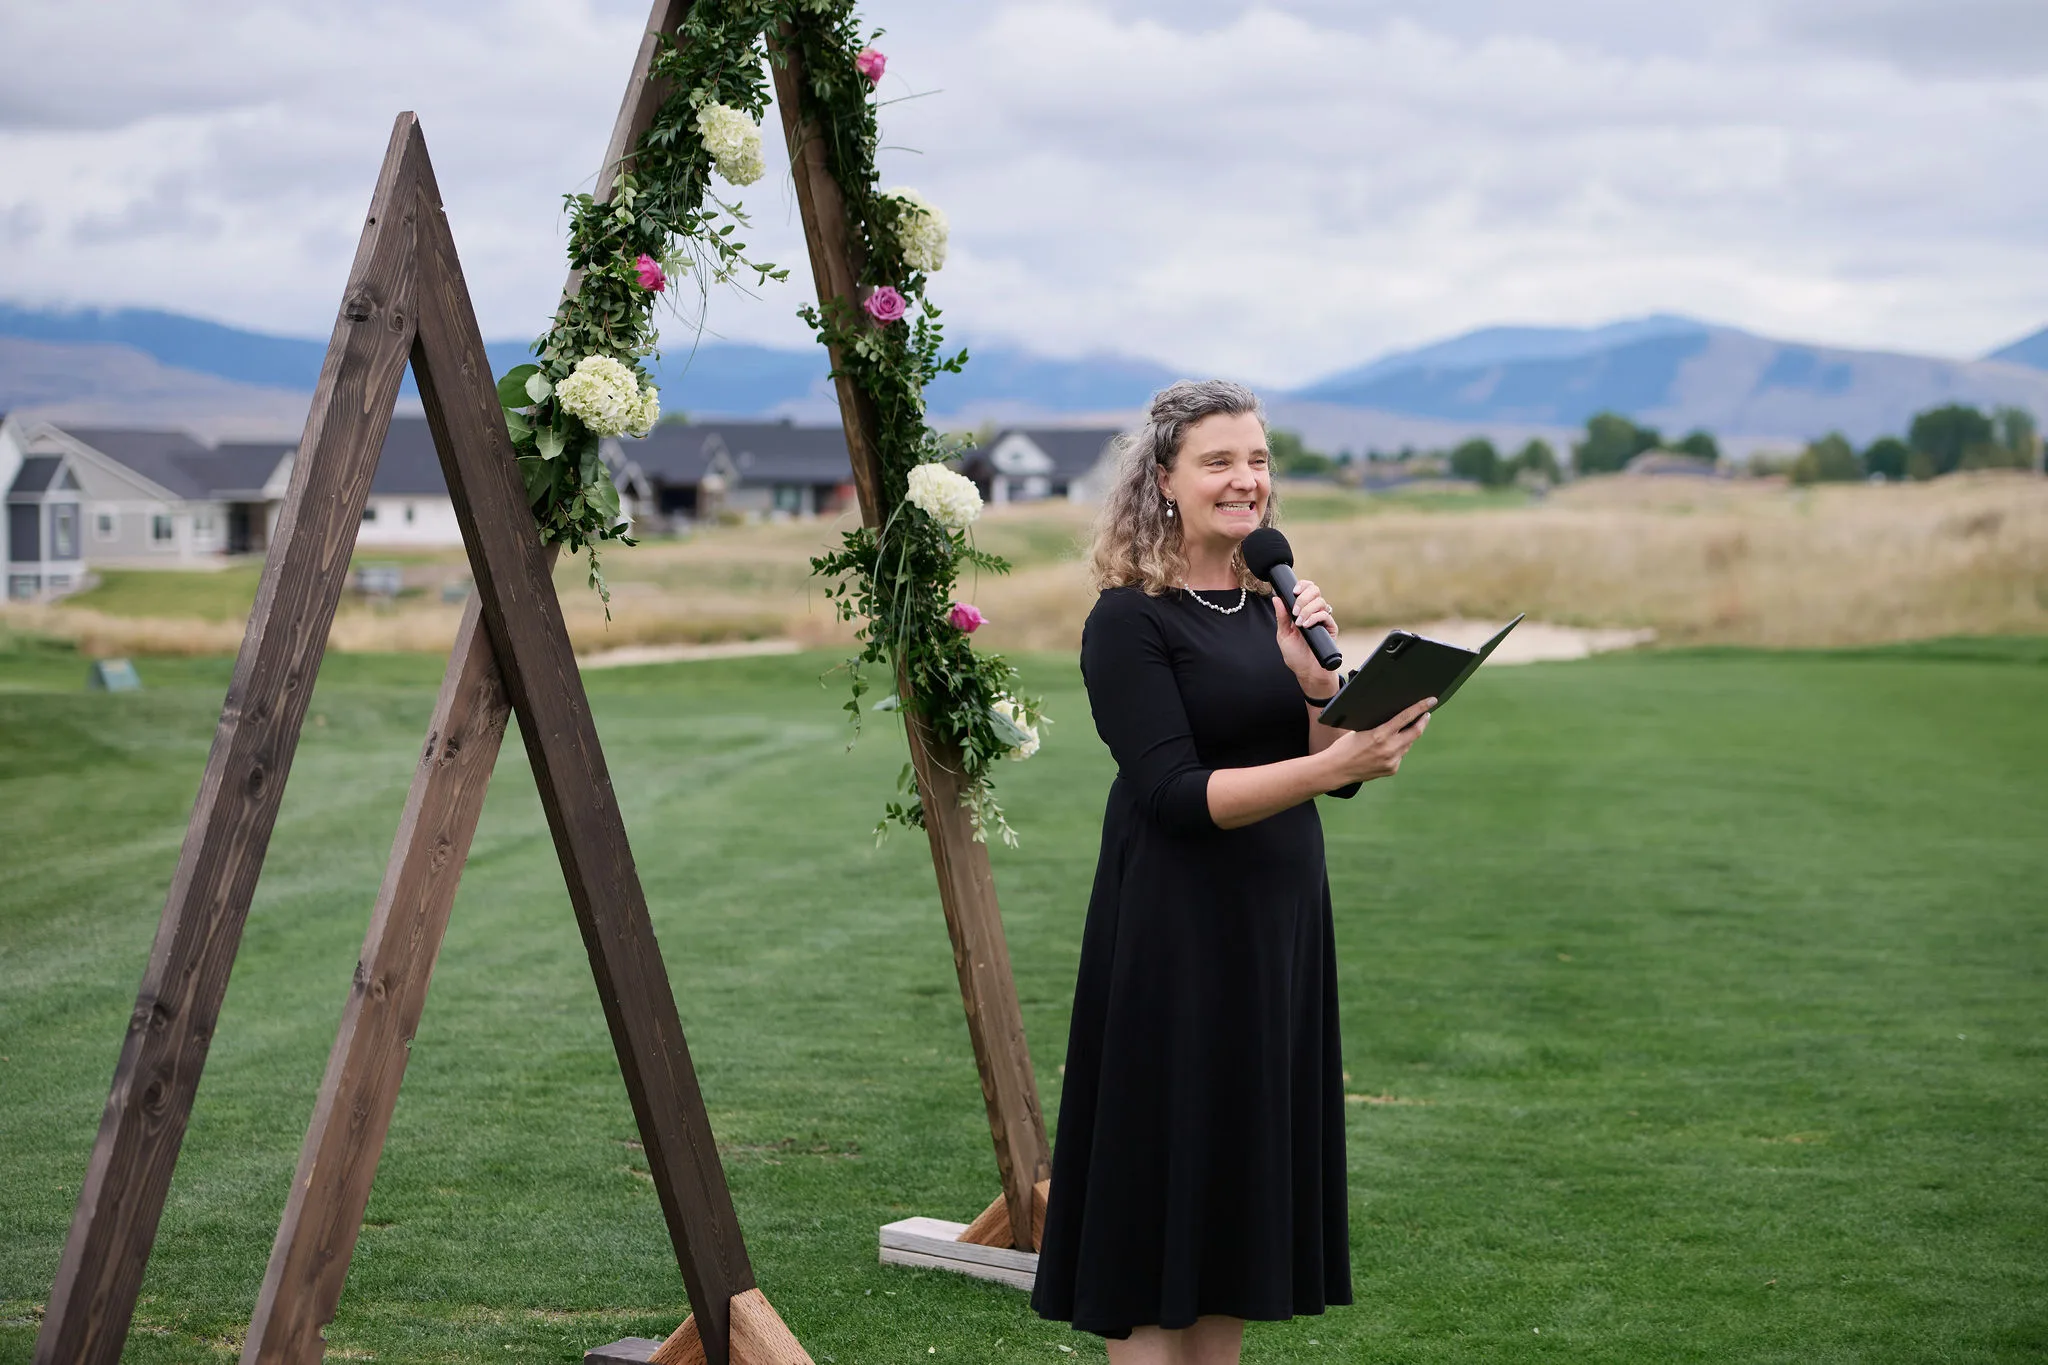 Officiant Courtney leading a wedding ceremony in Missoula, Montana